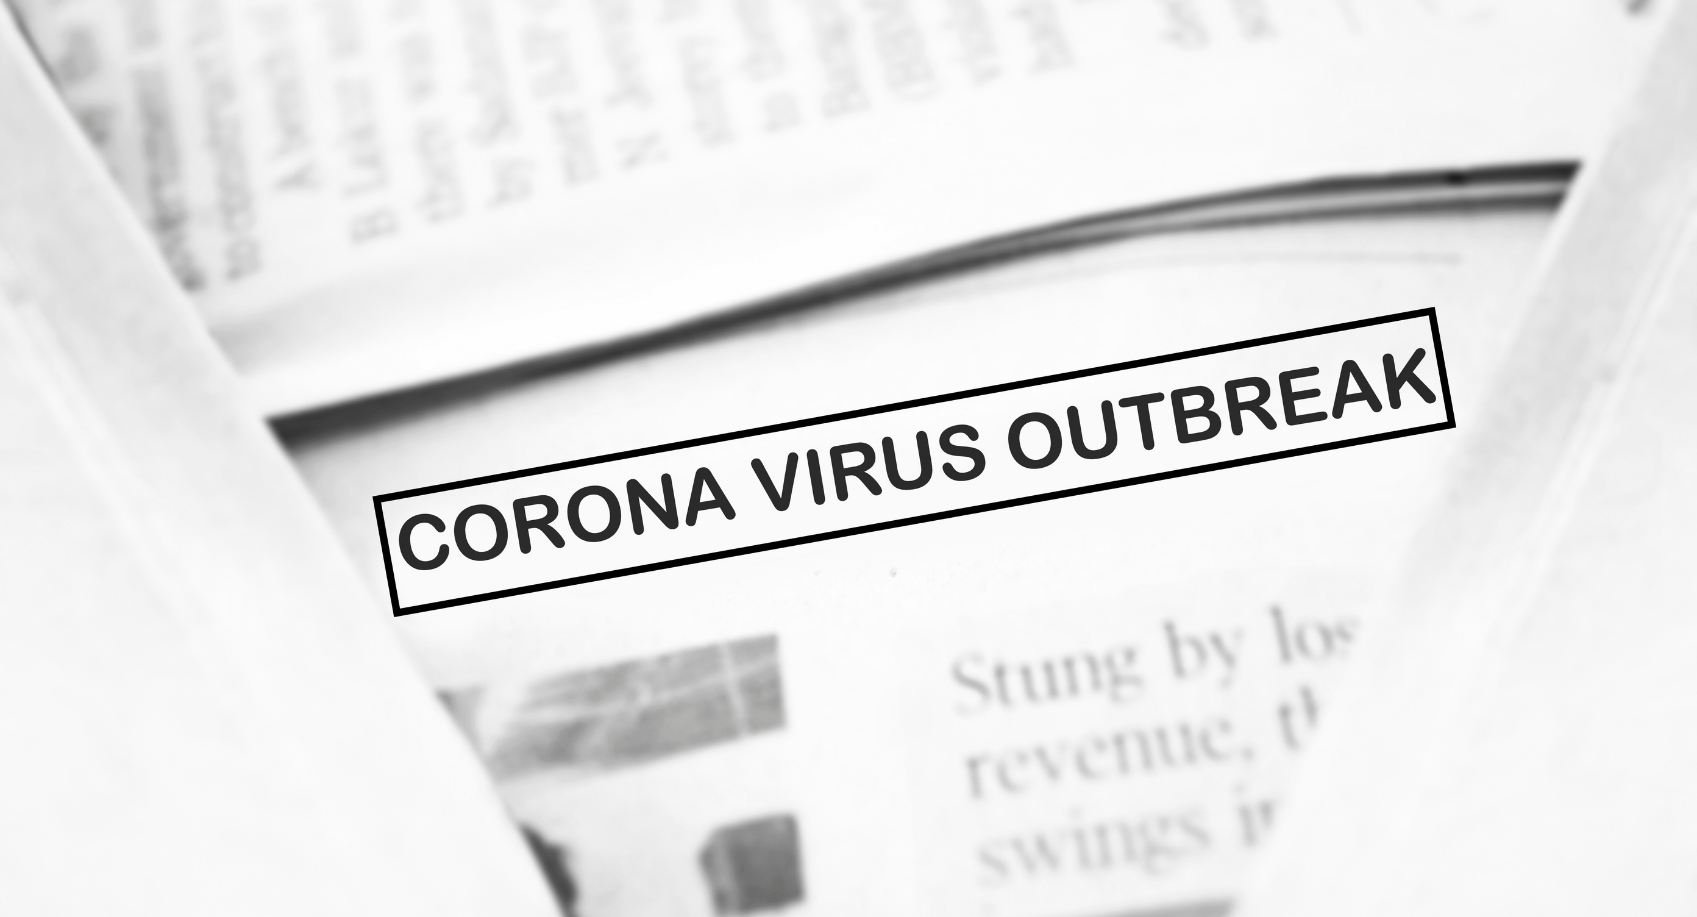 You are currently viewing Research Essay: How has the 2020 corona virus outbreak affected marketing businesses in the UK